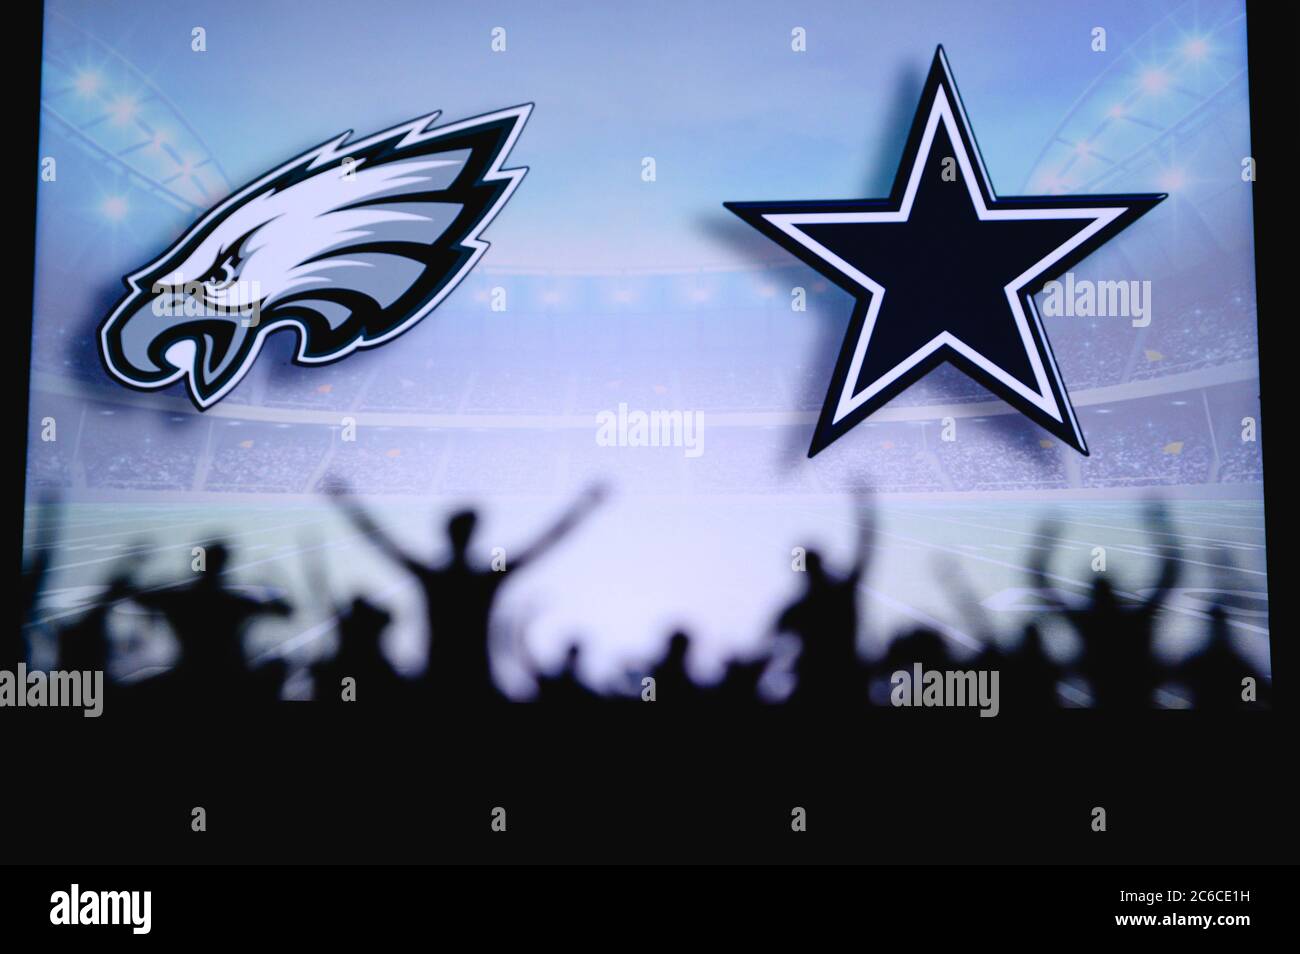 Philadelphia Eagles vs. Dallas Cowboys. Fans support on NFL Game. Silhouette of supporters, big screen with two rivals in background. Stock Photo